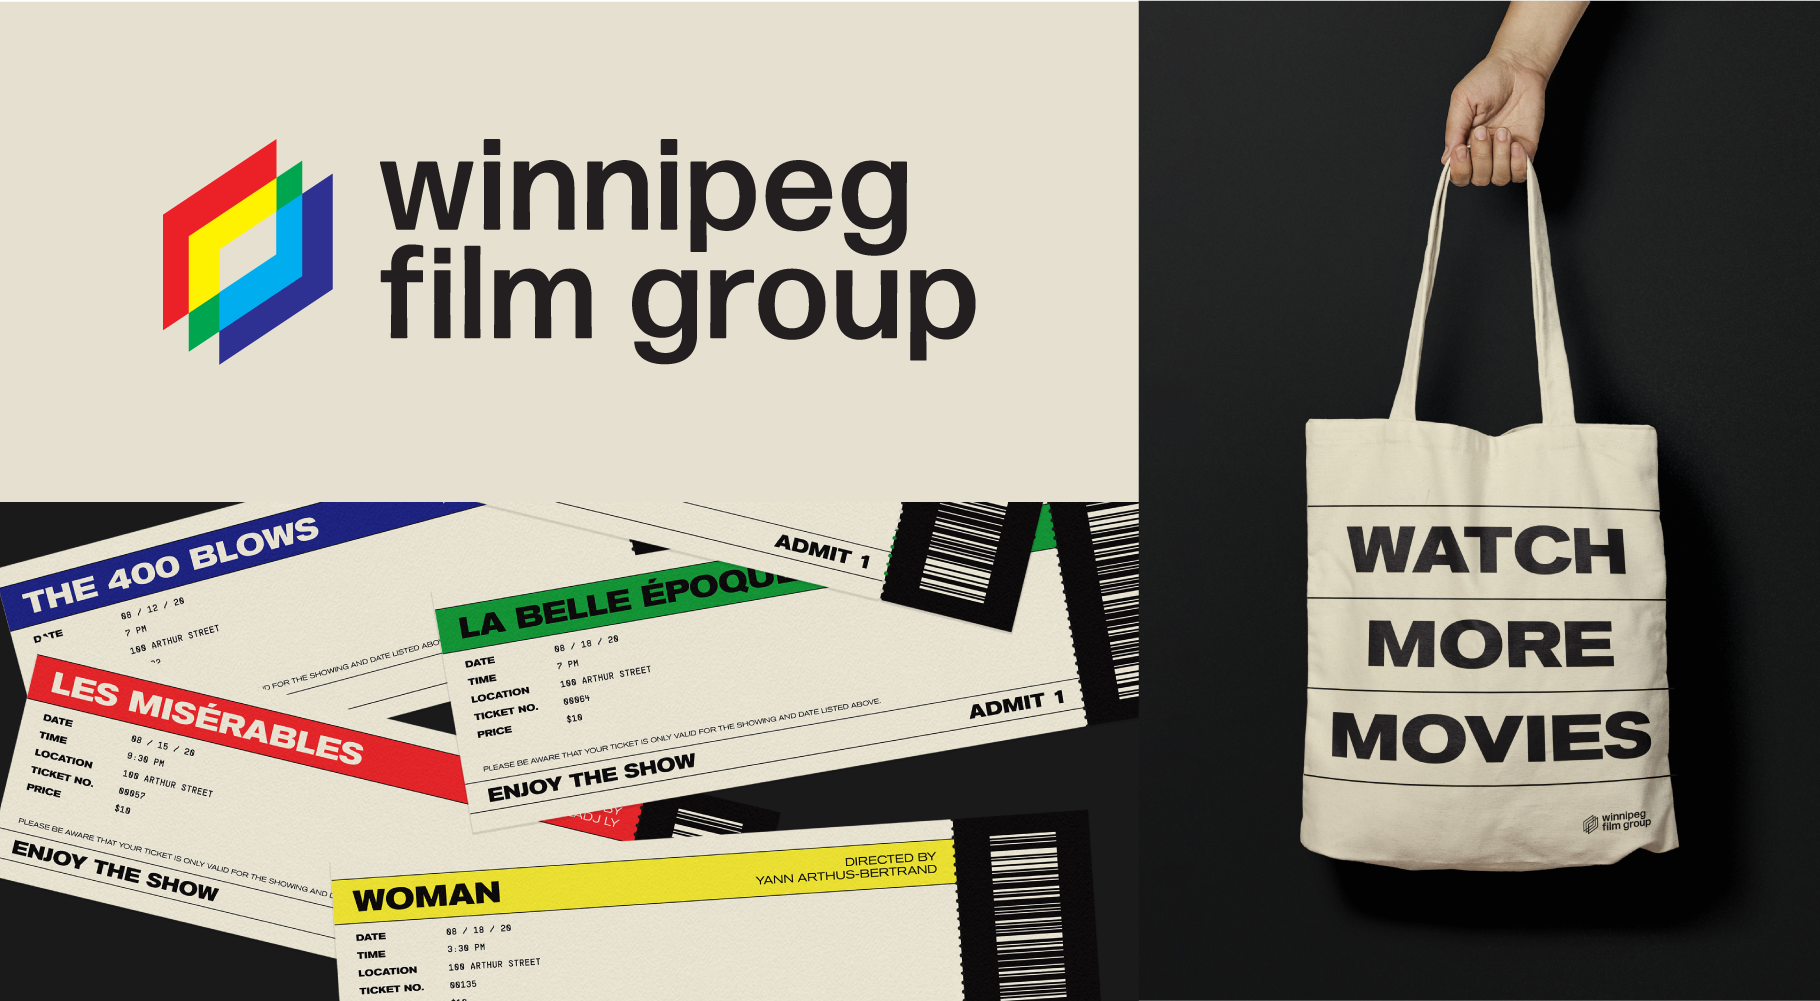 logo, tickets, and tote bag using the winnipeg film group branding